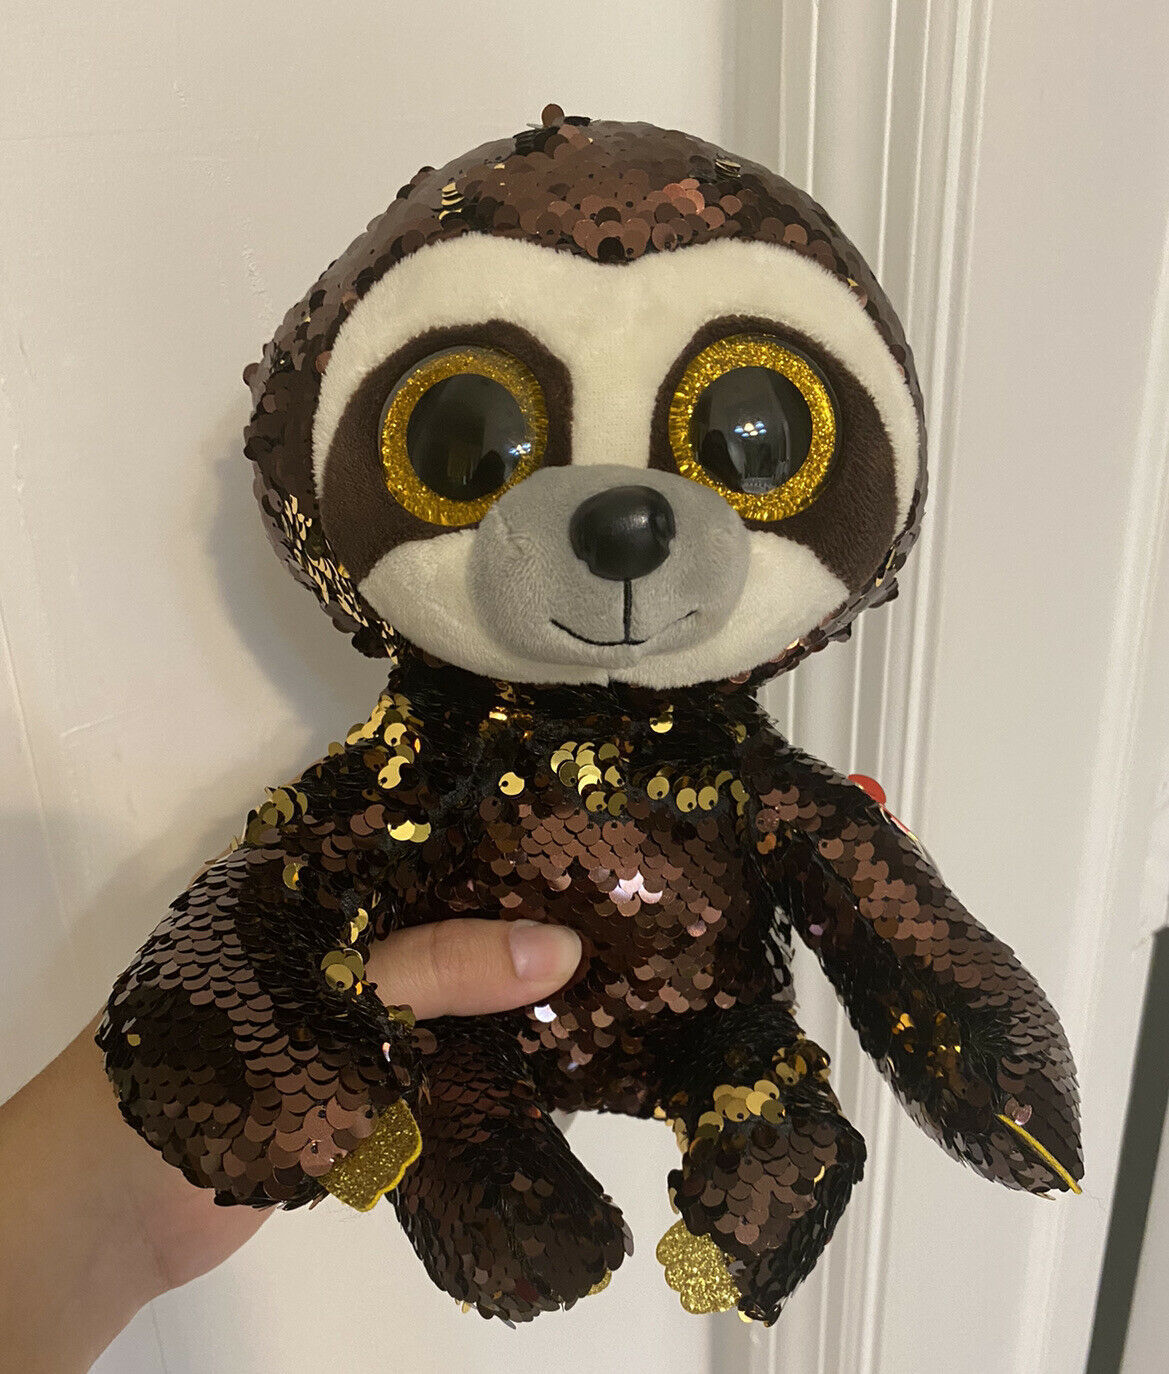 DANGLER the Sloth Ty Beanie Boos 6 Inch 2018 NEW MWMT 